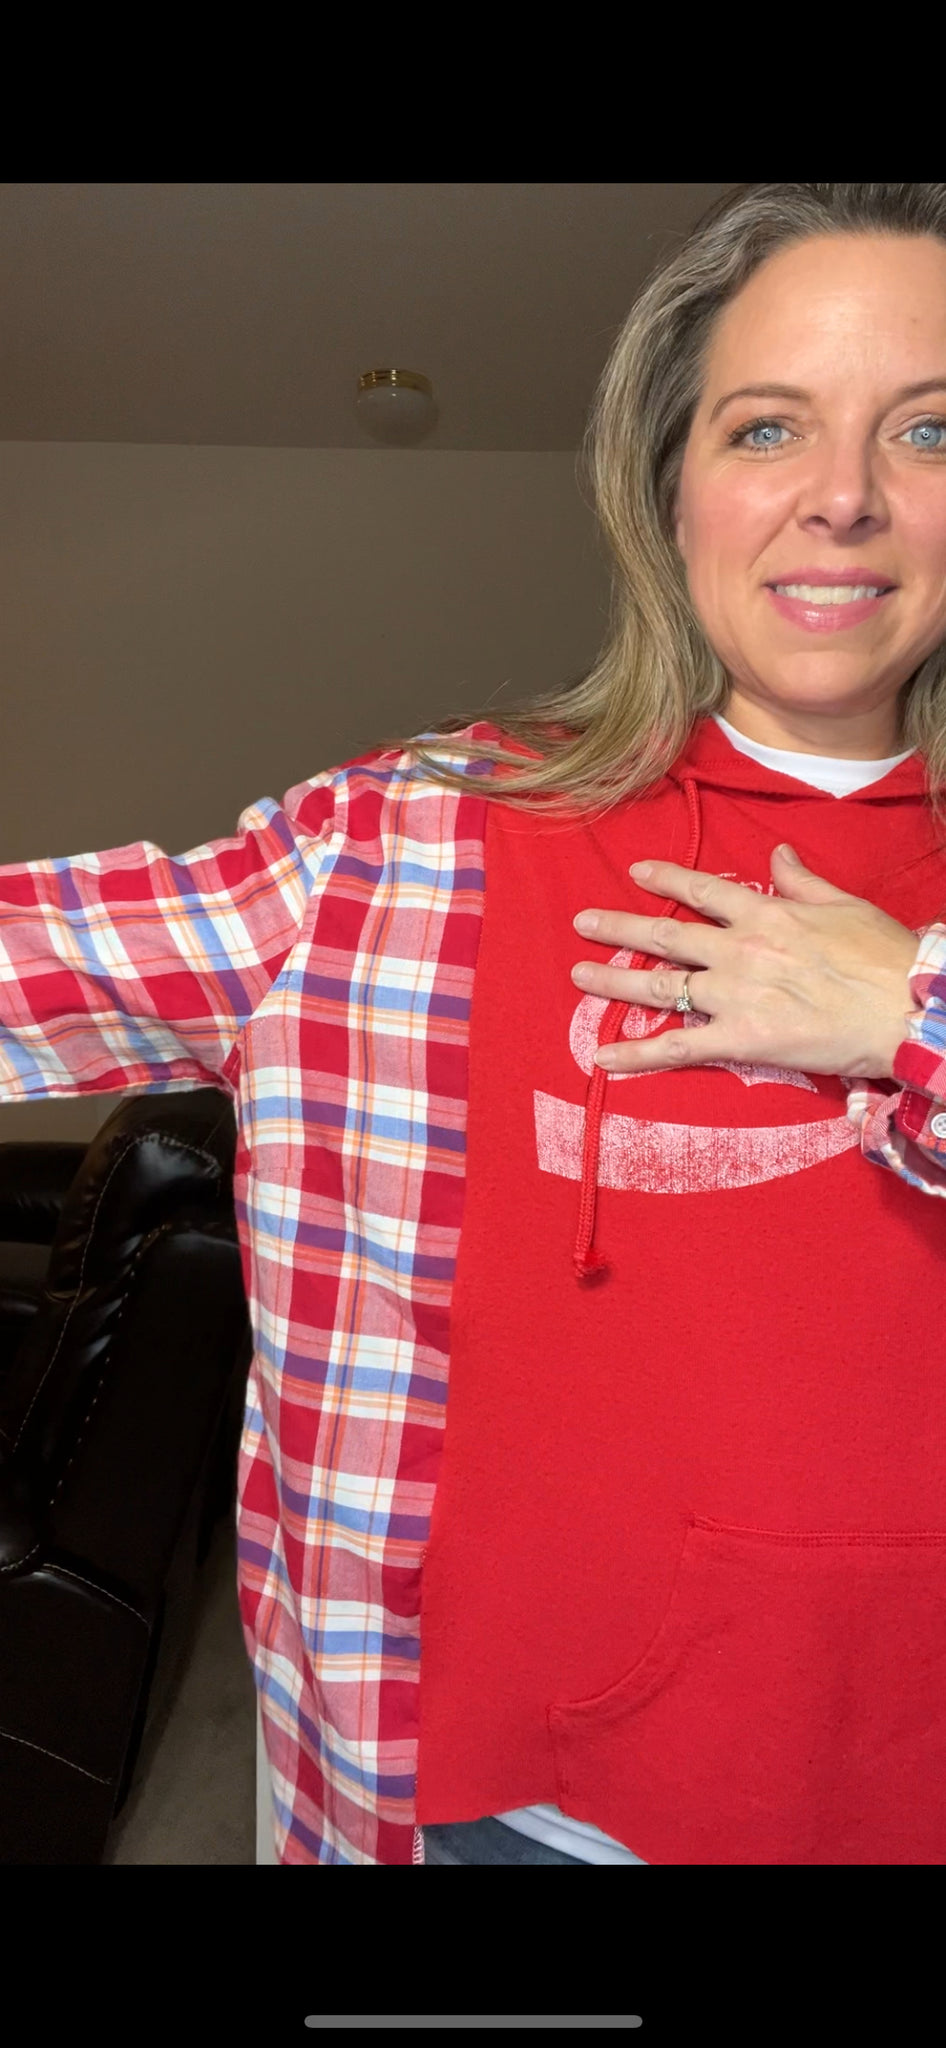 Coca Cola - woman’s LARGE - very thin sweatshirt with thin fitted, flannel sleeves - open bottom ￼